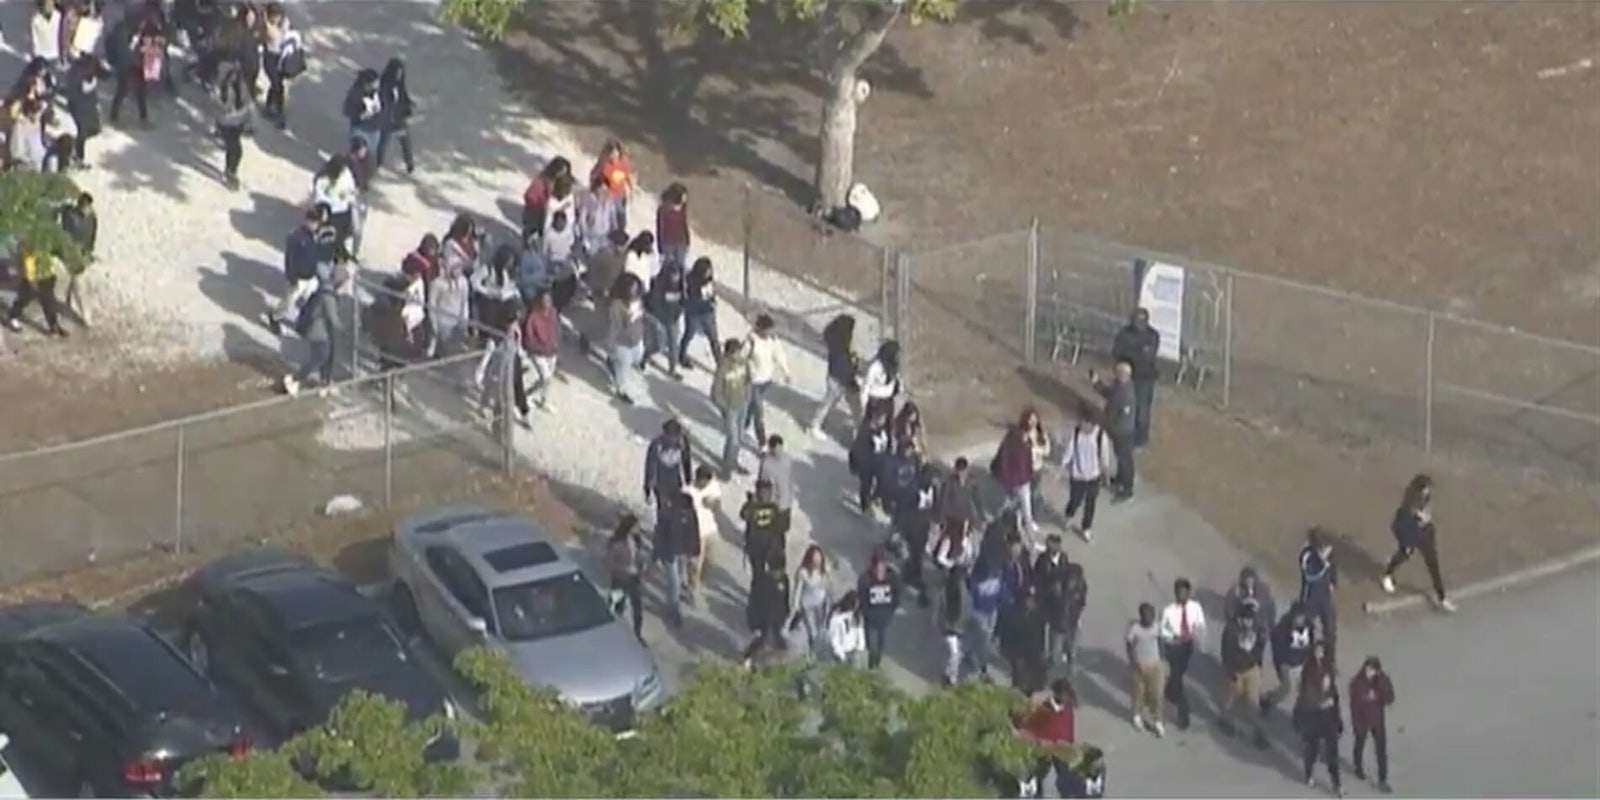 Over 2,000 schools and groups walked out to protest mass school shootings on March 14.